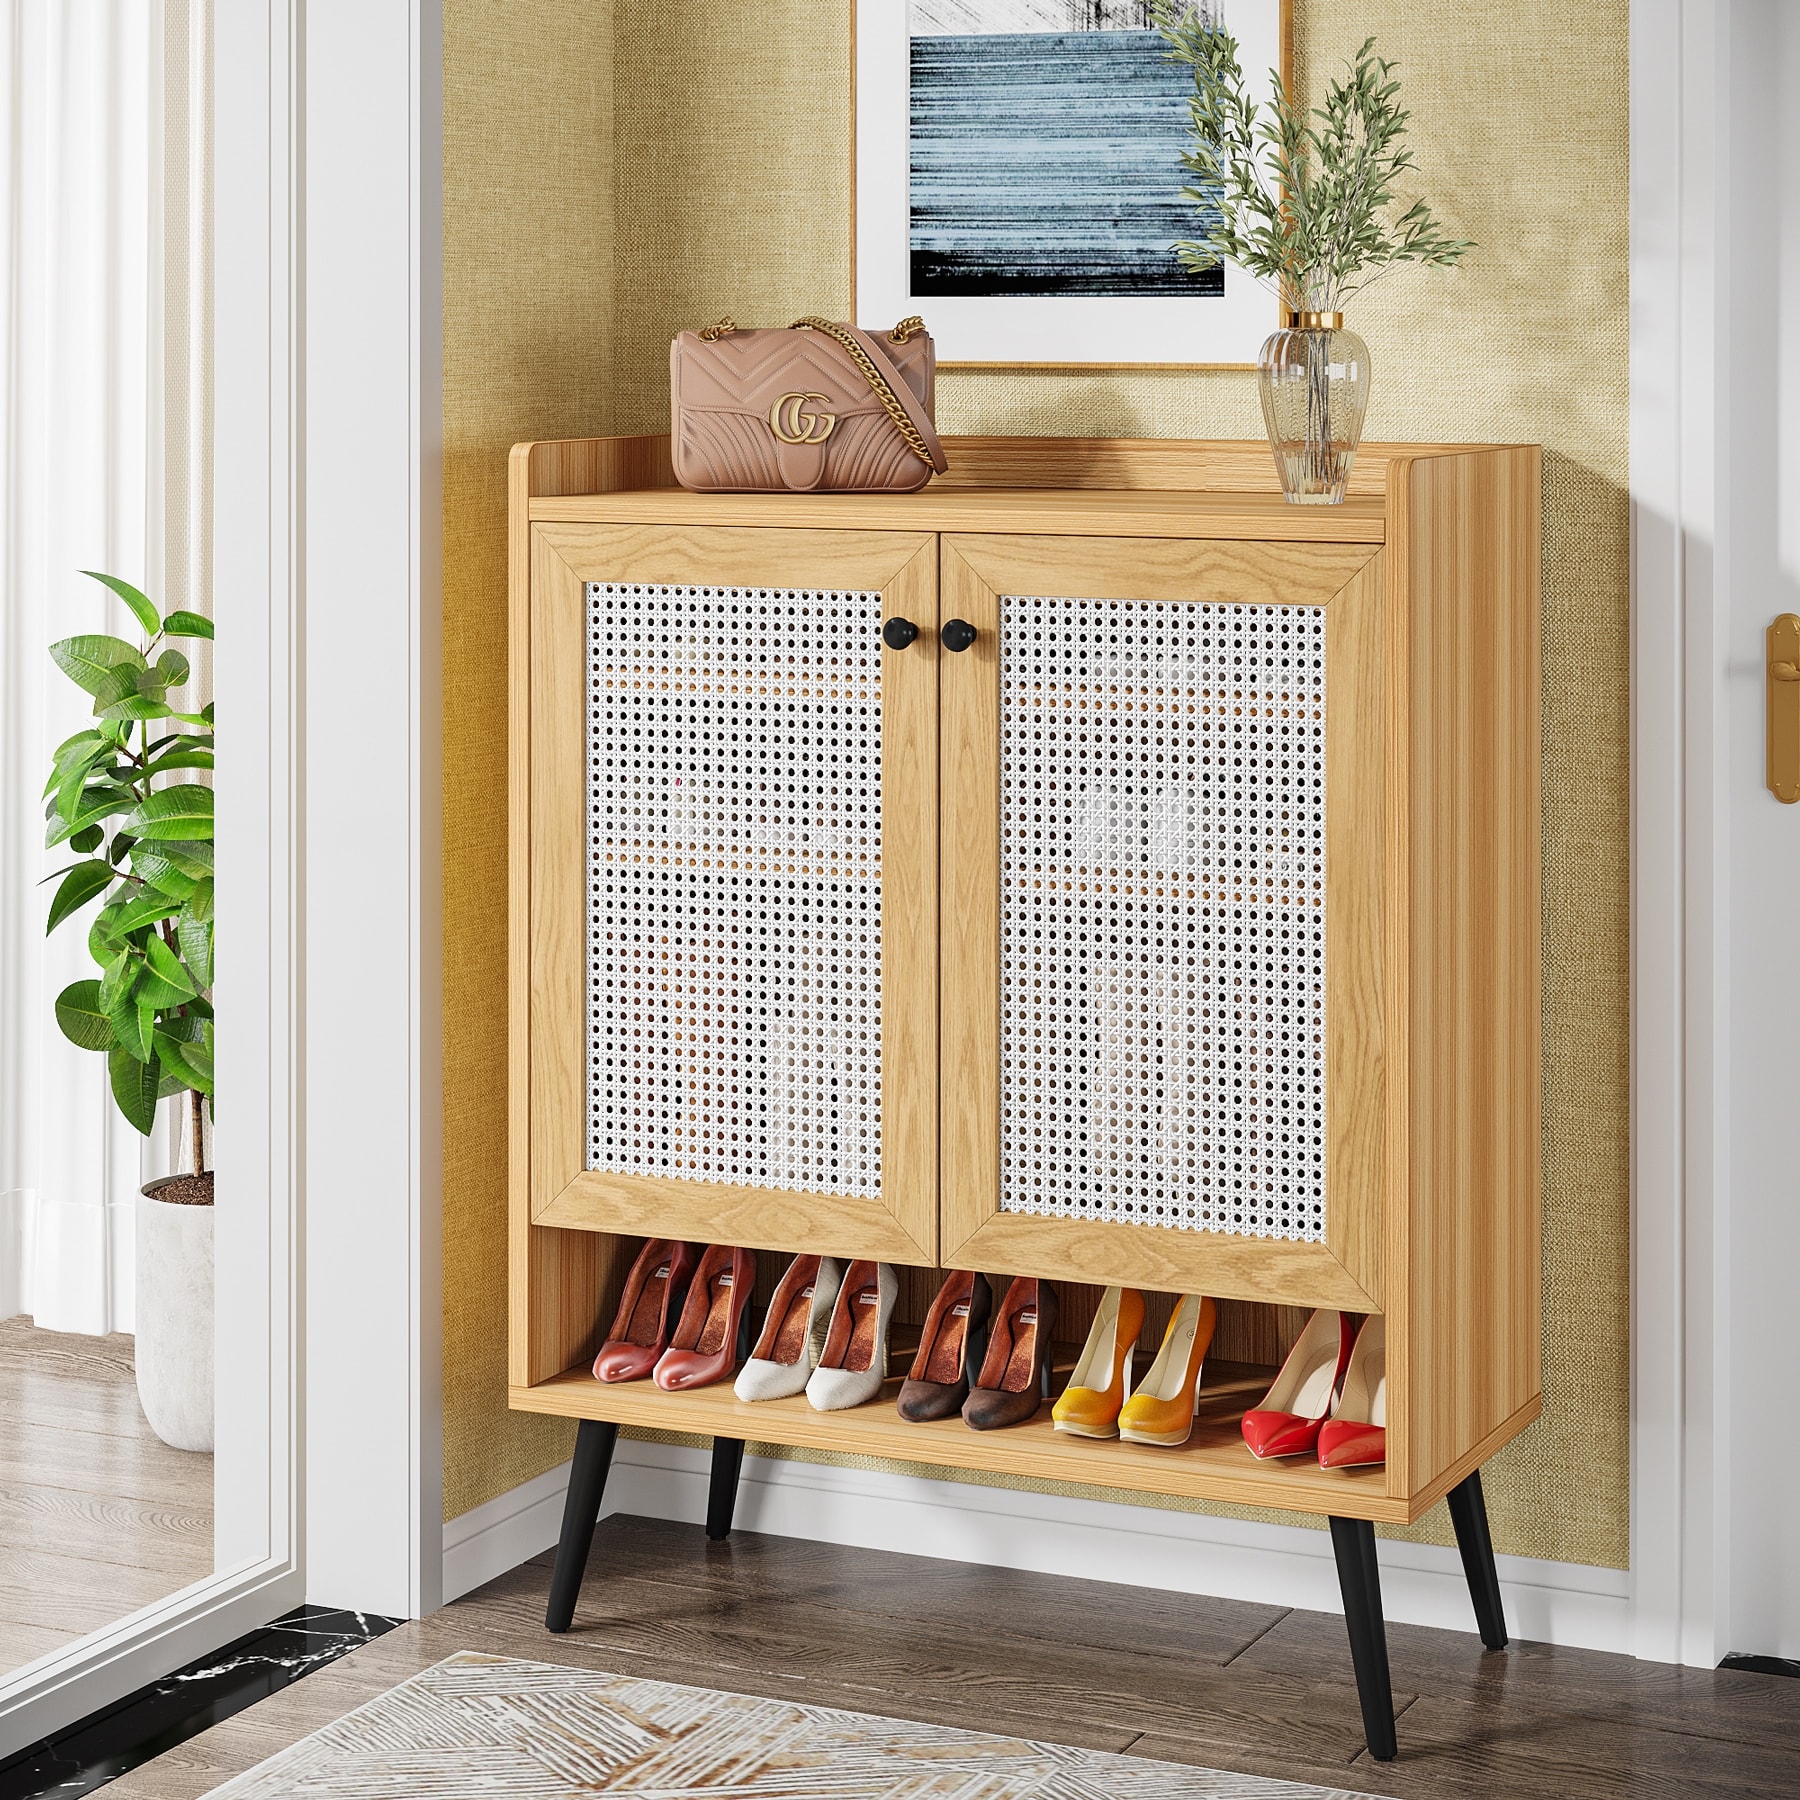 https://ak1.ostkcdn.com/images/products/is/images/direct/792efd9c2ca7f6b743a135d58519e5b255a6054e/Shoe-Cabinet%2C-Rattan-Shoe-Rack-Organizer%2C-6-Tiers-24-30-Pairs-Heavy-Duty-Shoe-Storage-Cabinet-with-Doors-for-Entryway.jpg